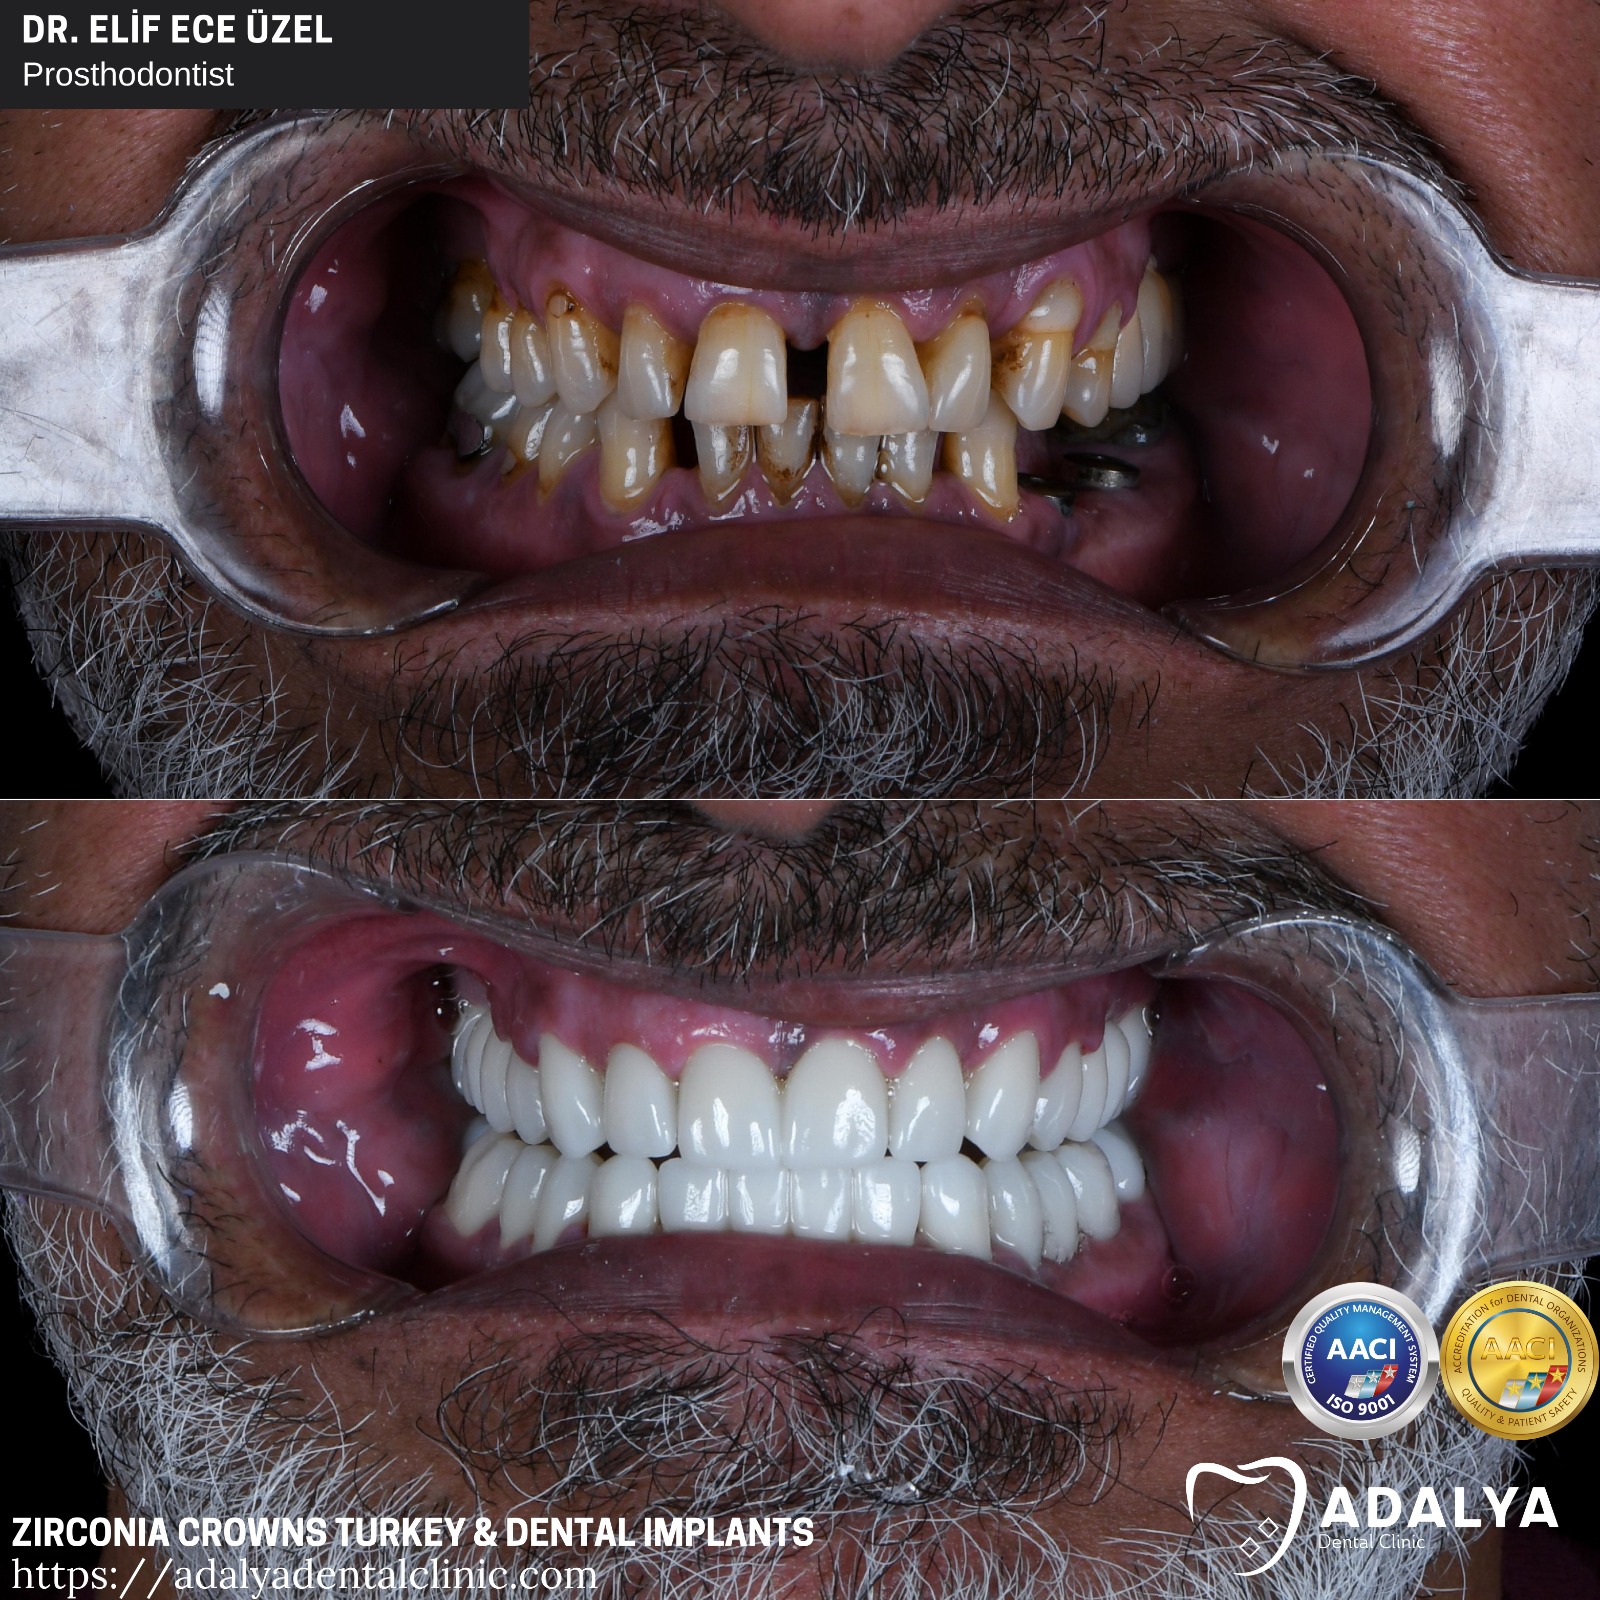 dental clinic turkey antalya zirconium crowns tooth implants cost price packages